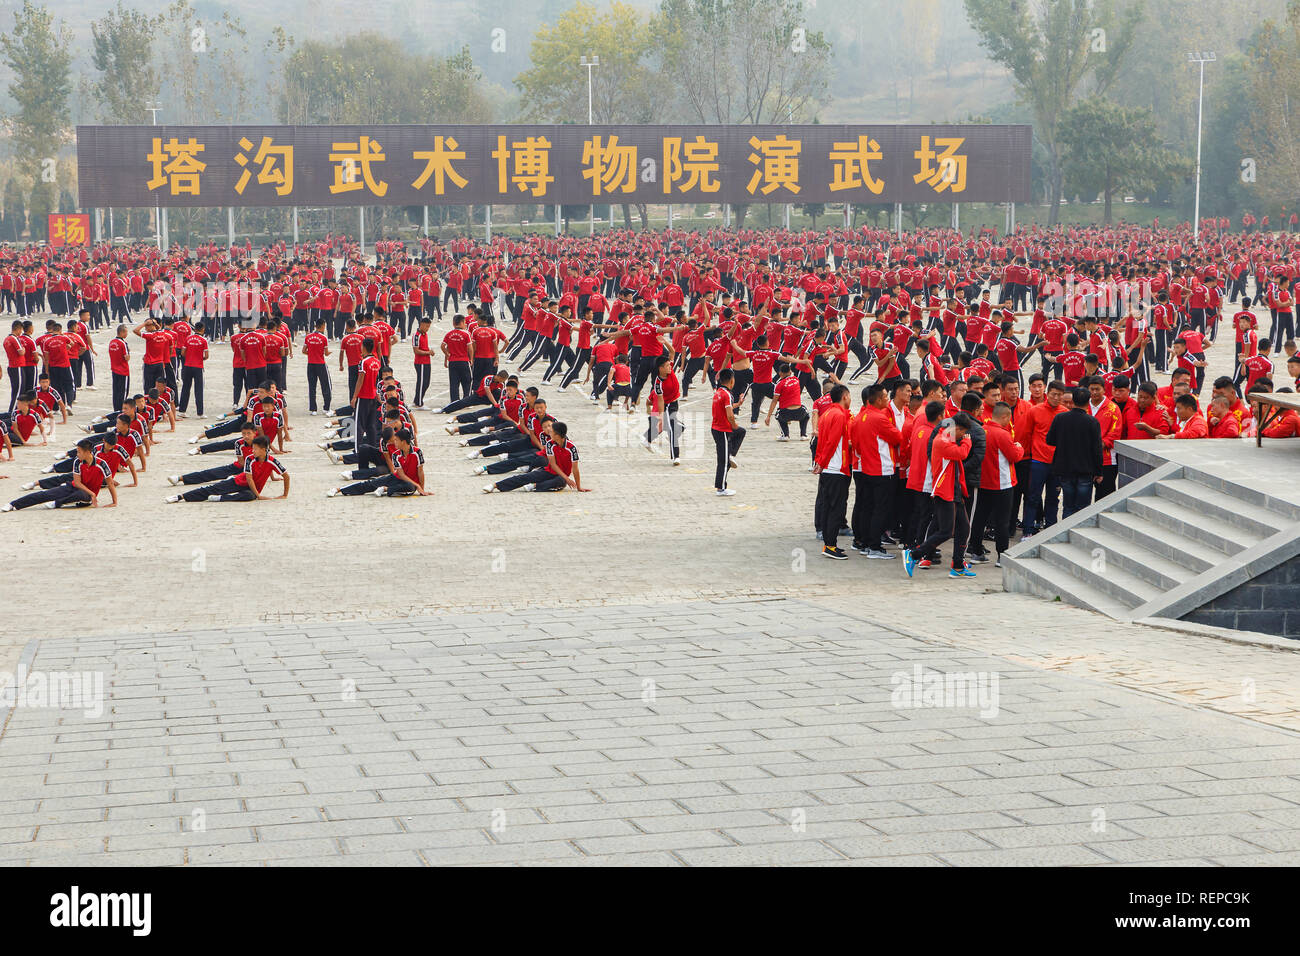 Dengfeng, China - October 16, 2018: Training pupils martial arts school on the square. Shaolin Temple. Stock Photo